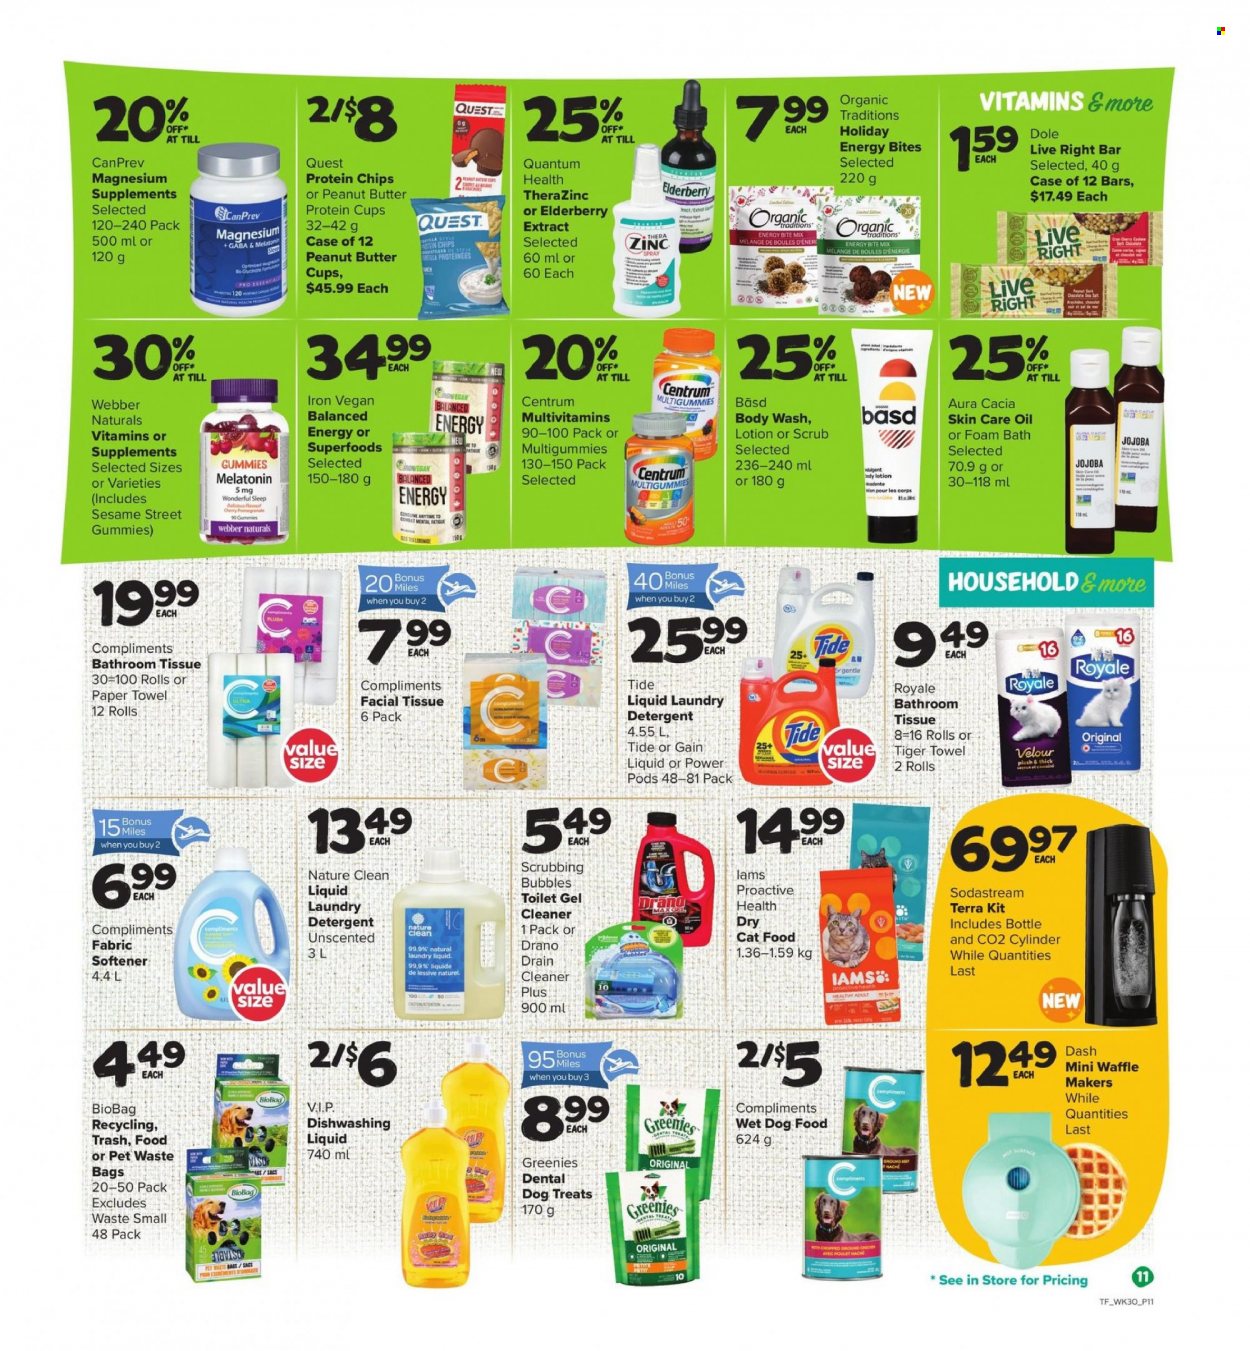 thumbnail - Thrifty Foods Flyer - November 24, 2022 - November 30, 2022 - Sales products - Dole, cherries, peanut butter cups, Sesame Street, chips, bath tissue, paper towels, Gain, Scrubbing Bubbles, cleaner, Tide, fabric softener, laundry detergent, dishwashing liquid, body wash, bath foam, body lotion, bag, trash bags, animal food, Greenies, cat food, dog food, wet dog food, dry cat food, Iams, magnesium, multivitamin, Centrum, detergent. Page 12.